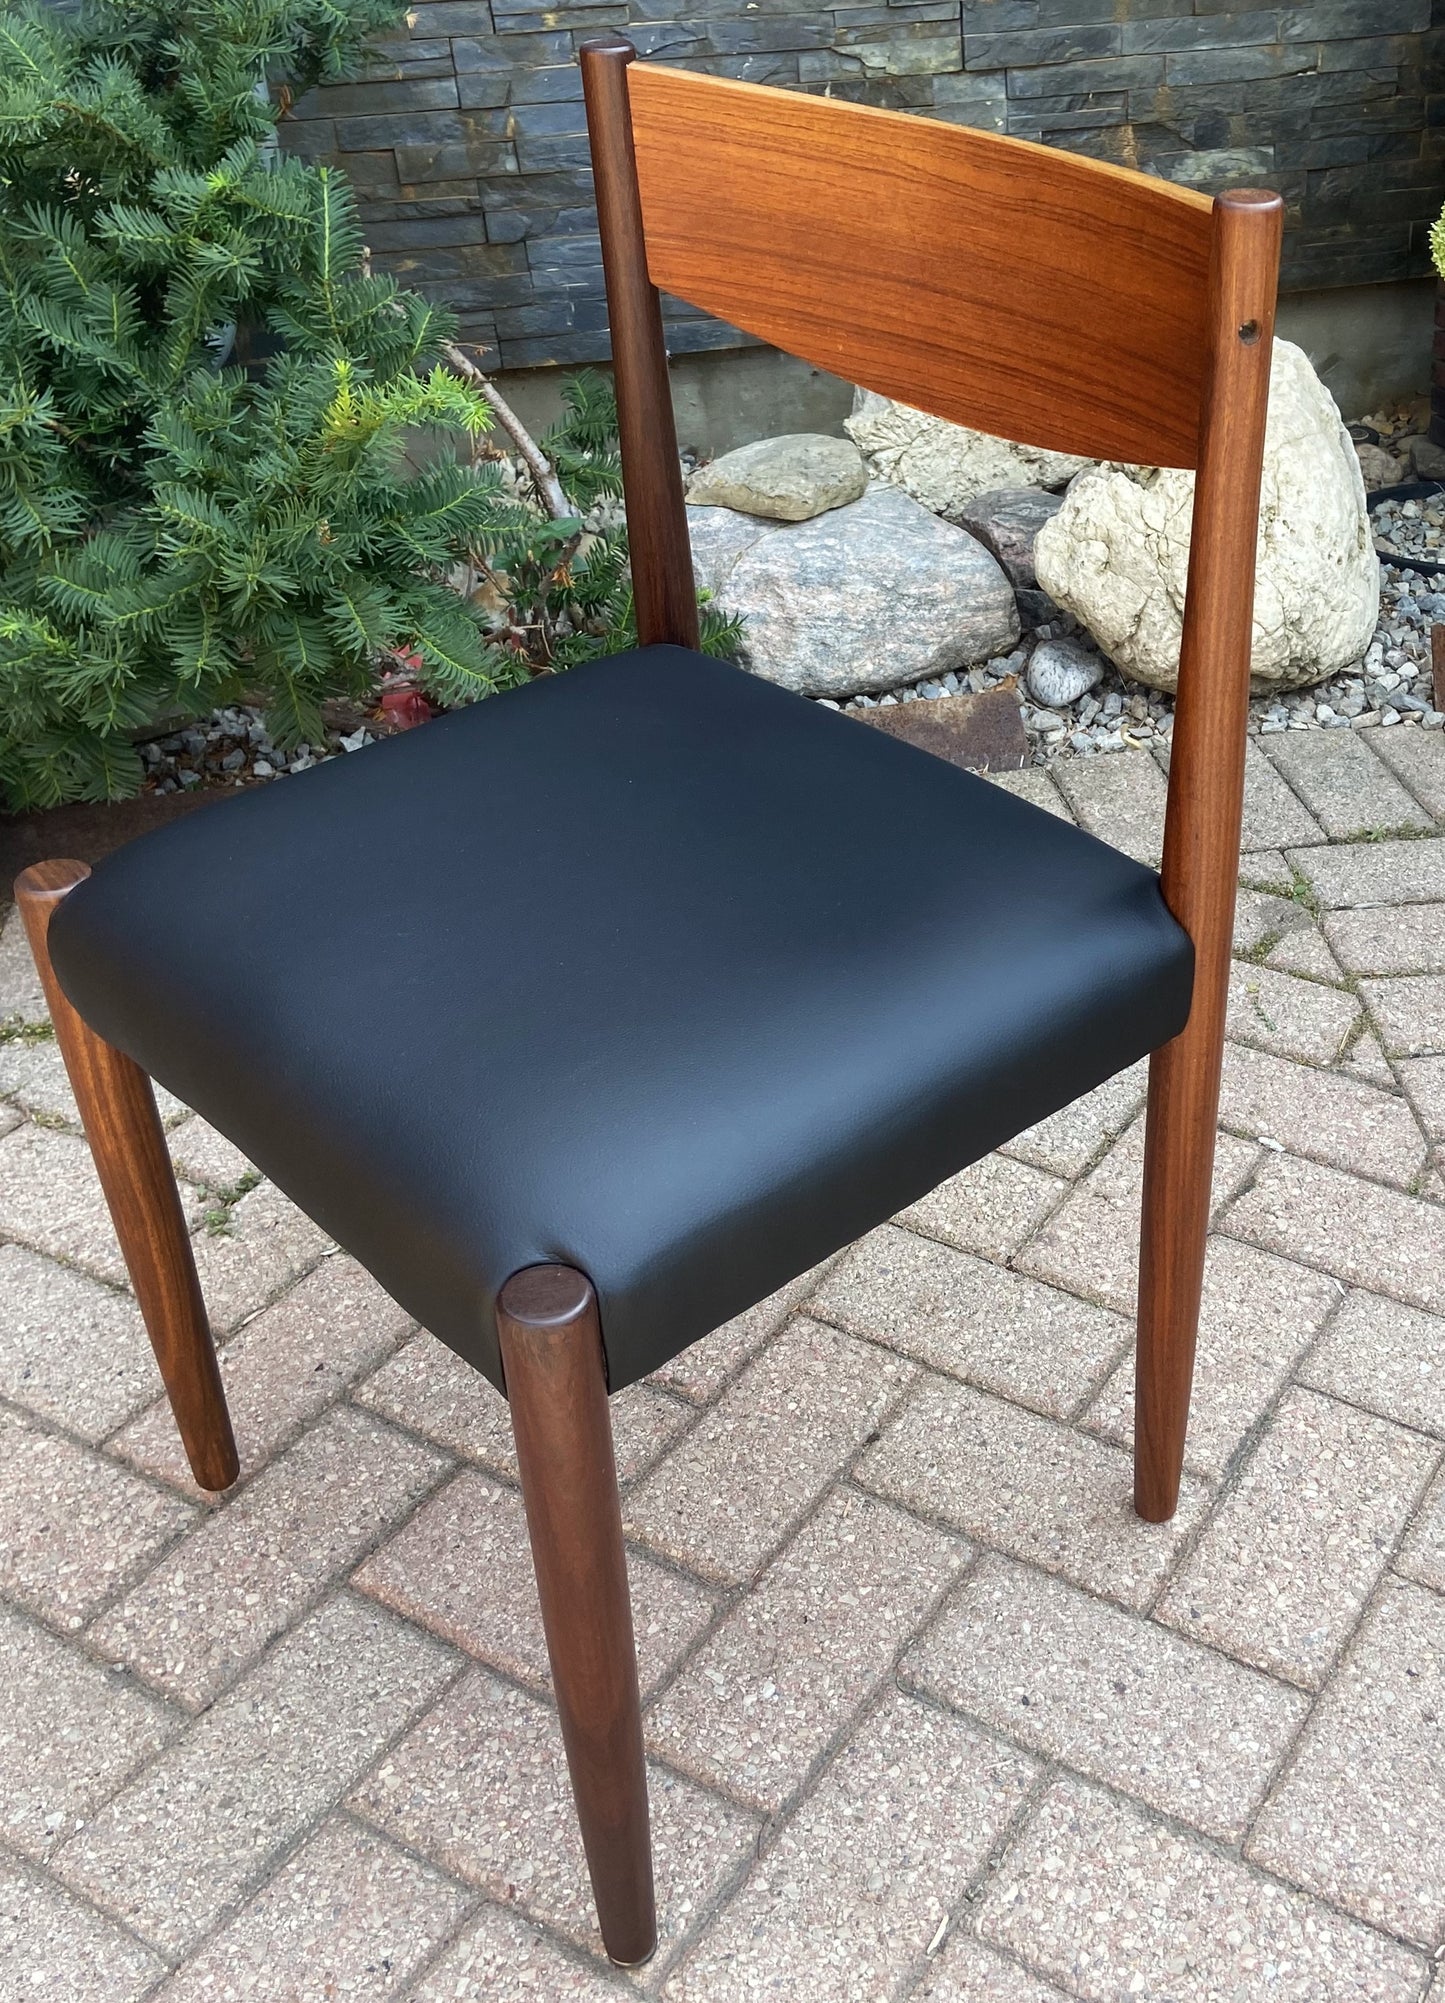 6 REFINISHED REUPHOLSTERED Danish MCM Teak Chairs by P. Volther for Frem Rojle